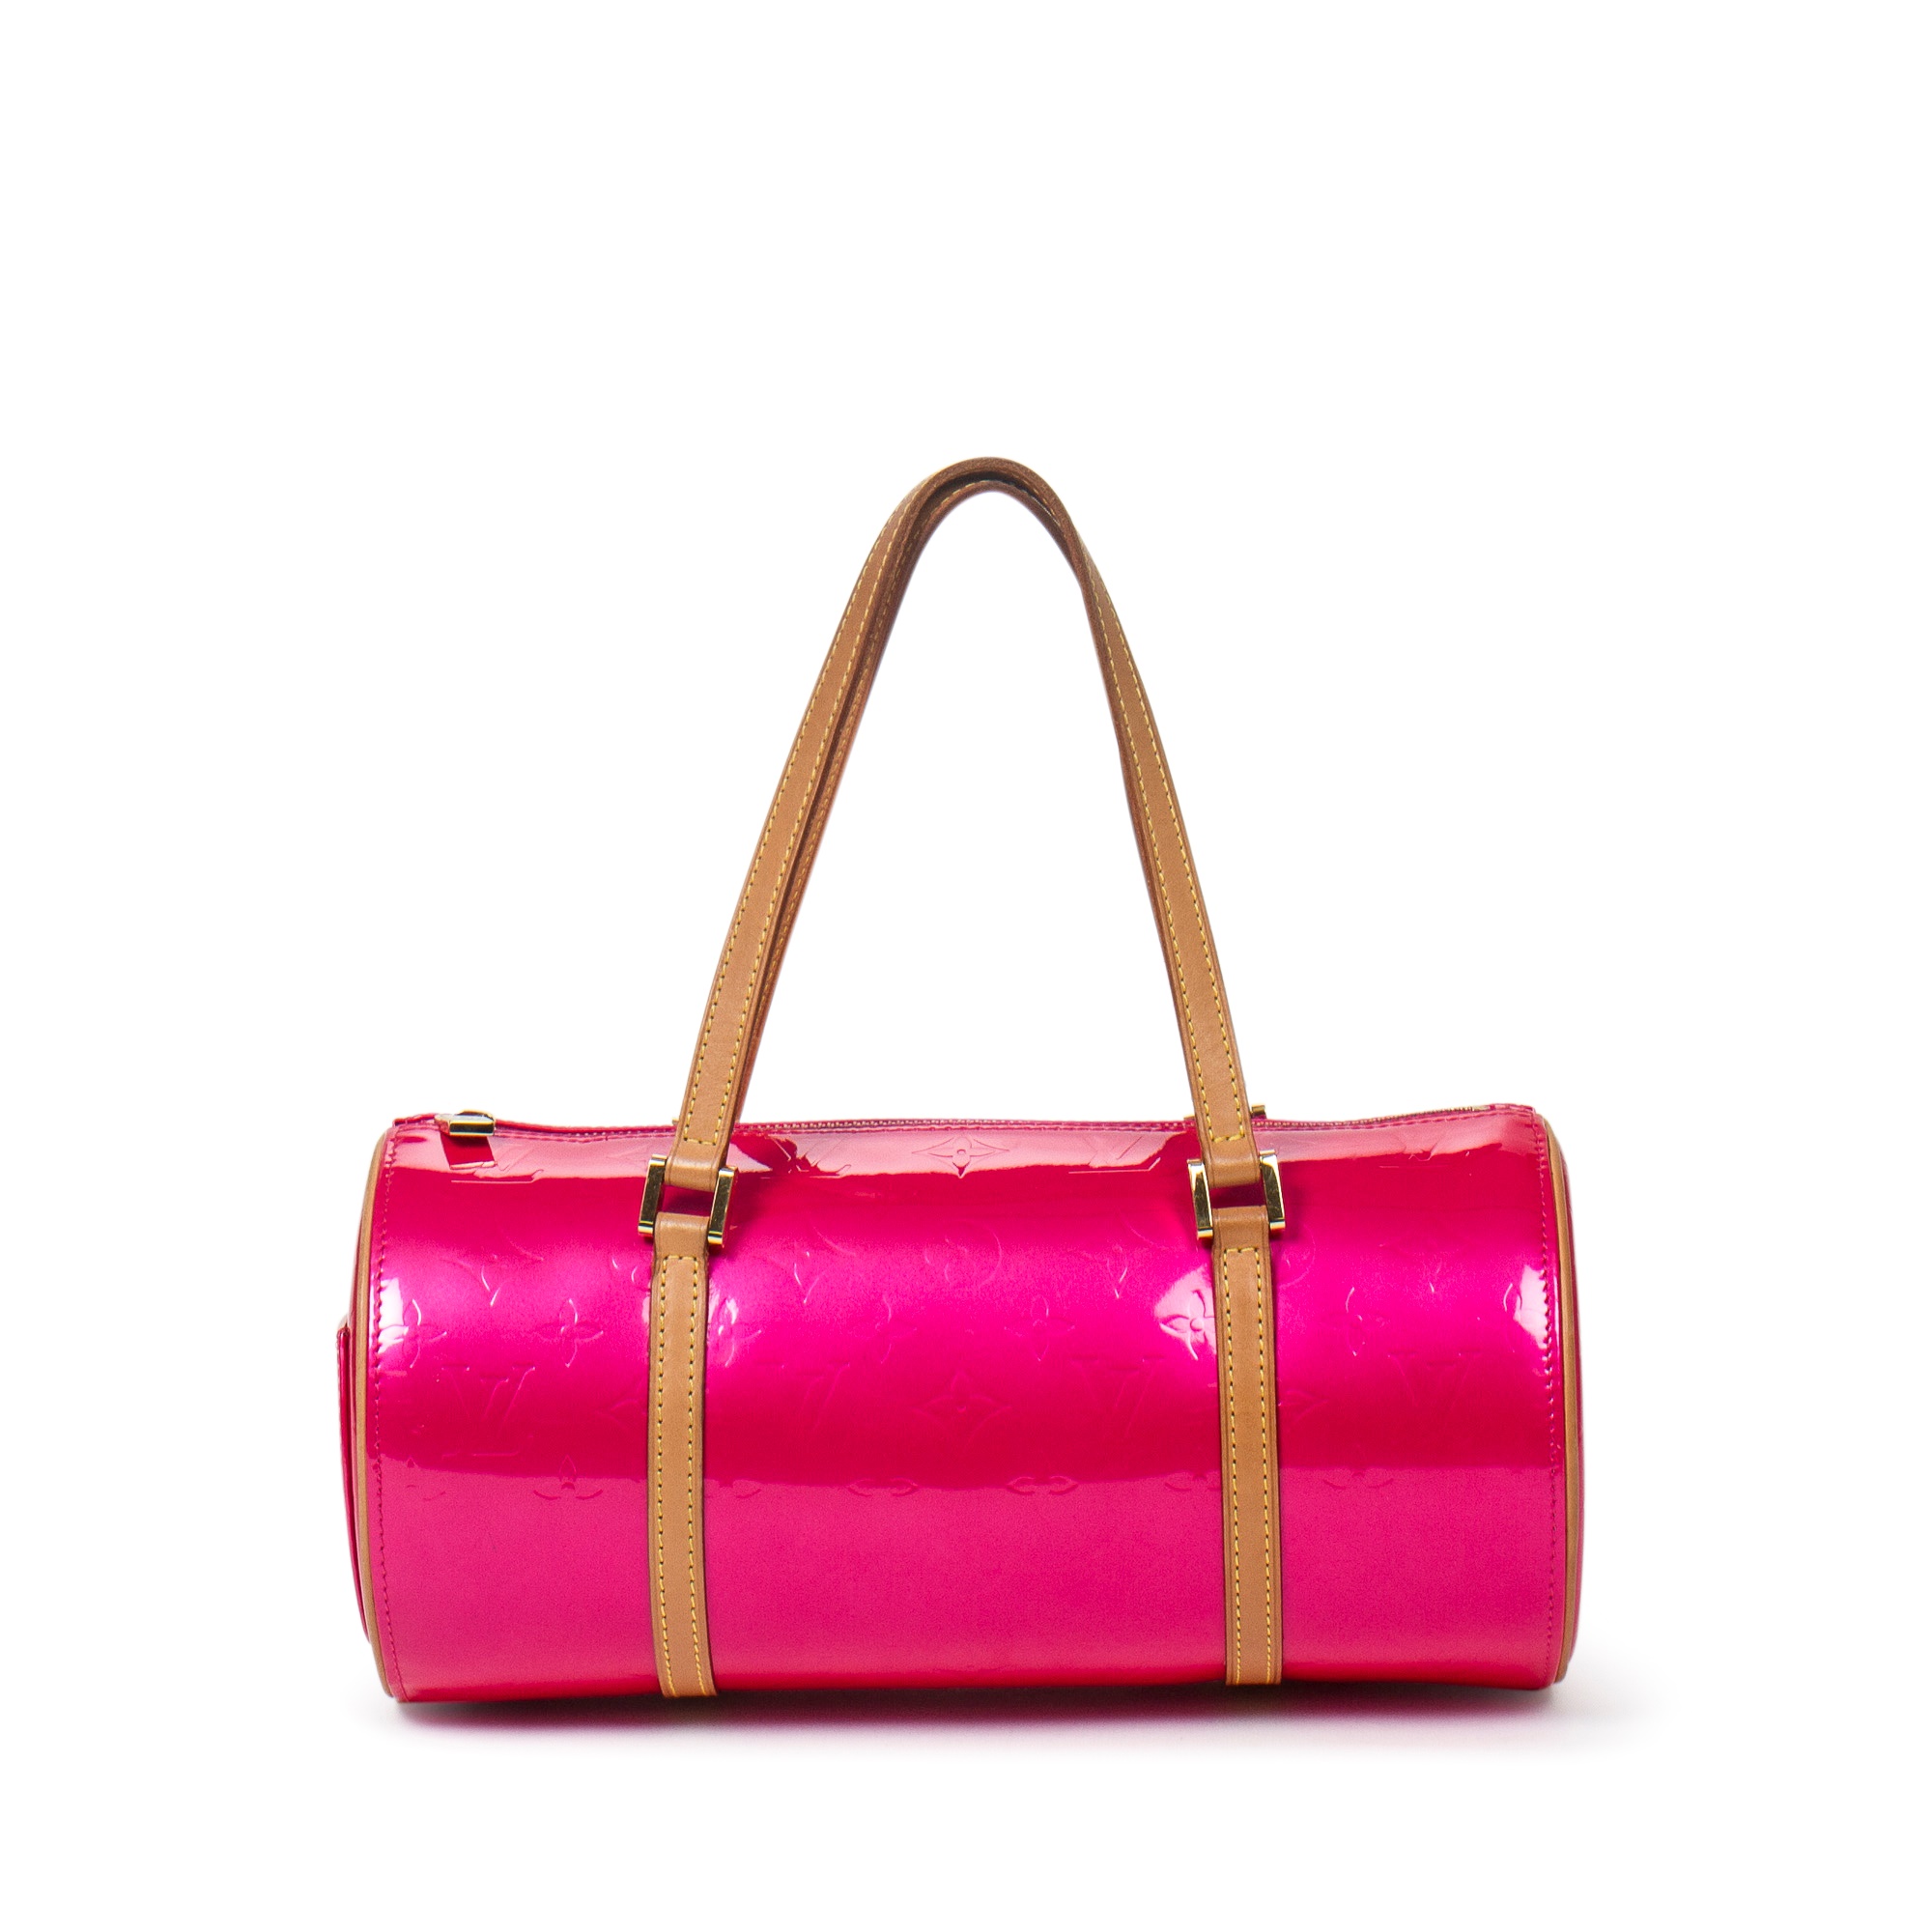 Sold at Auction: LOUIS VUITTON - NEW MEDIUM VERNIS BEDFORD